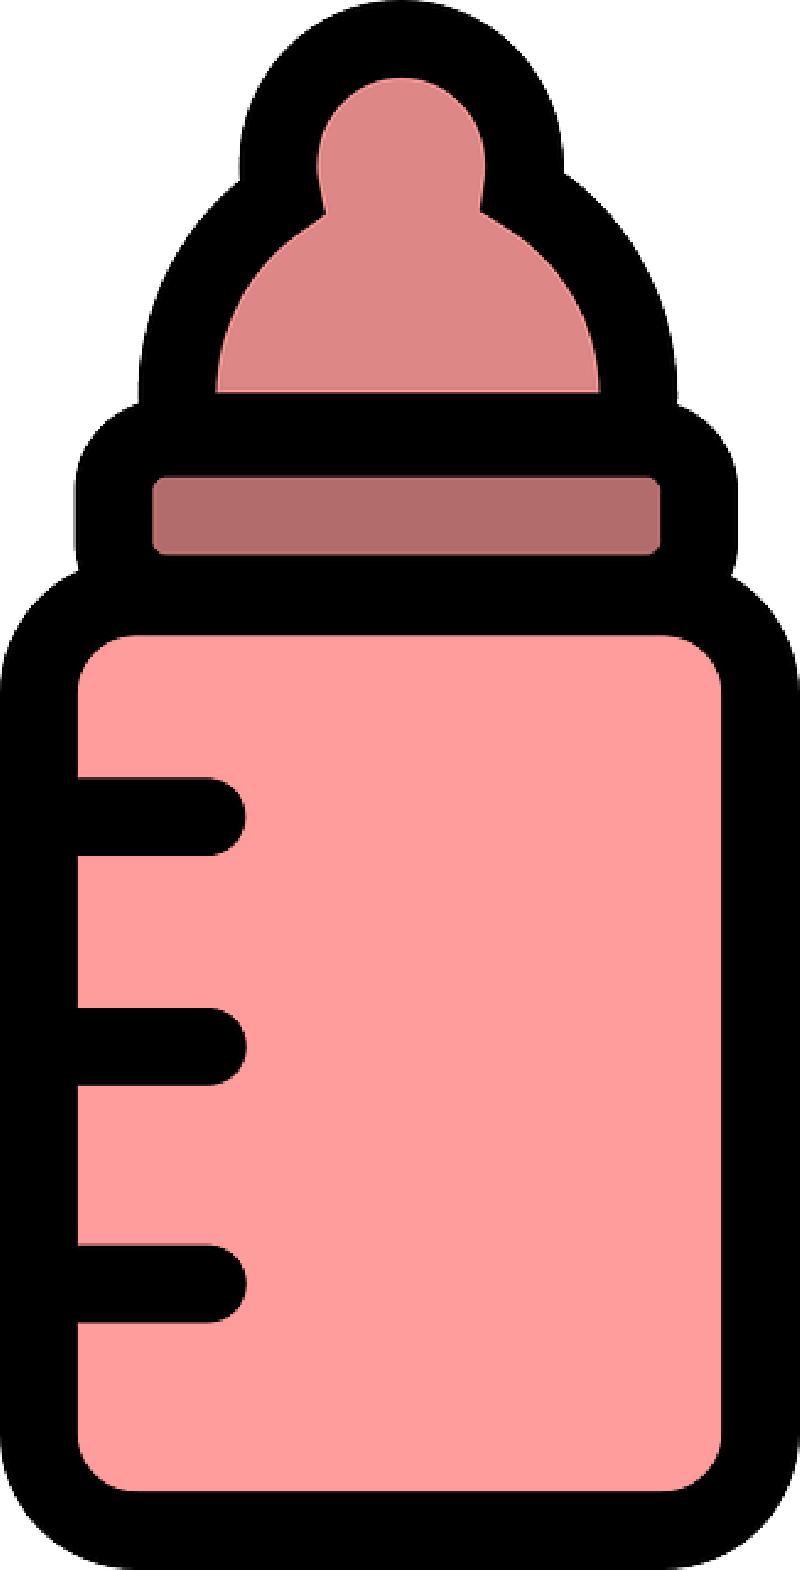 Baby Bottle PNG Images